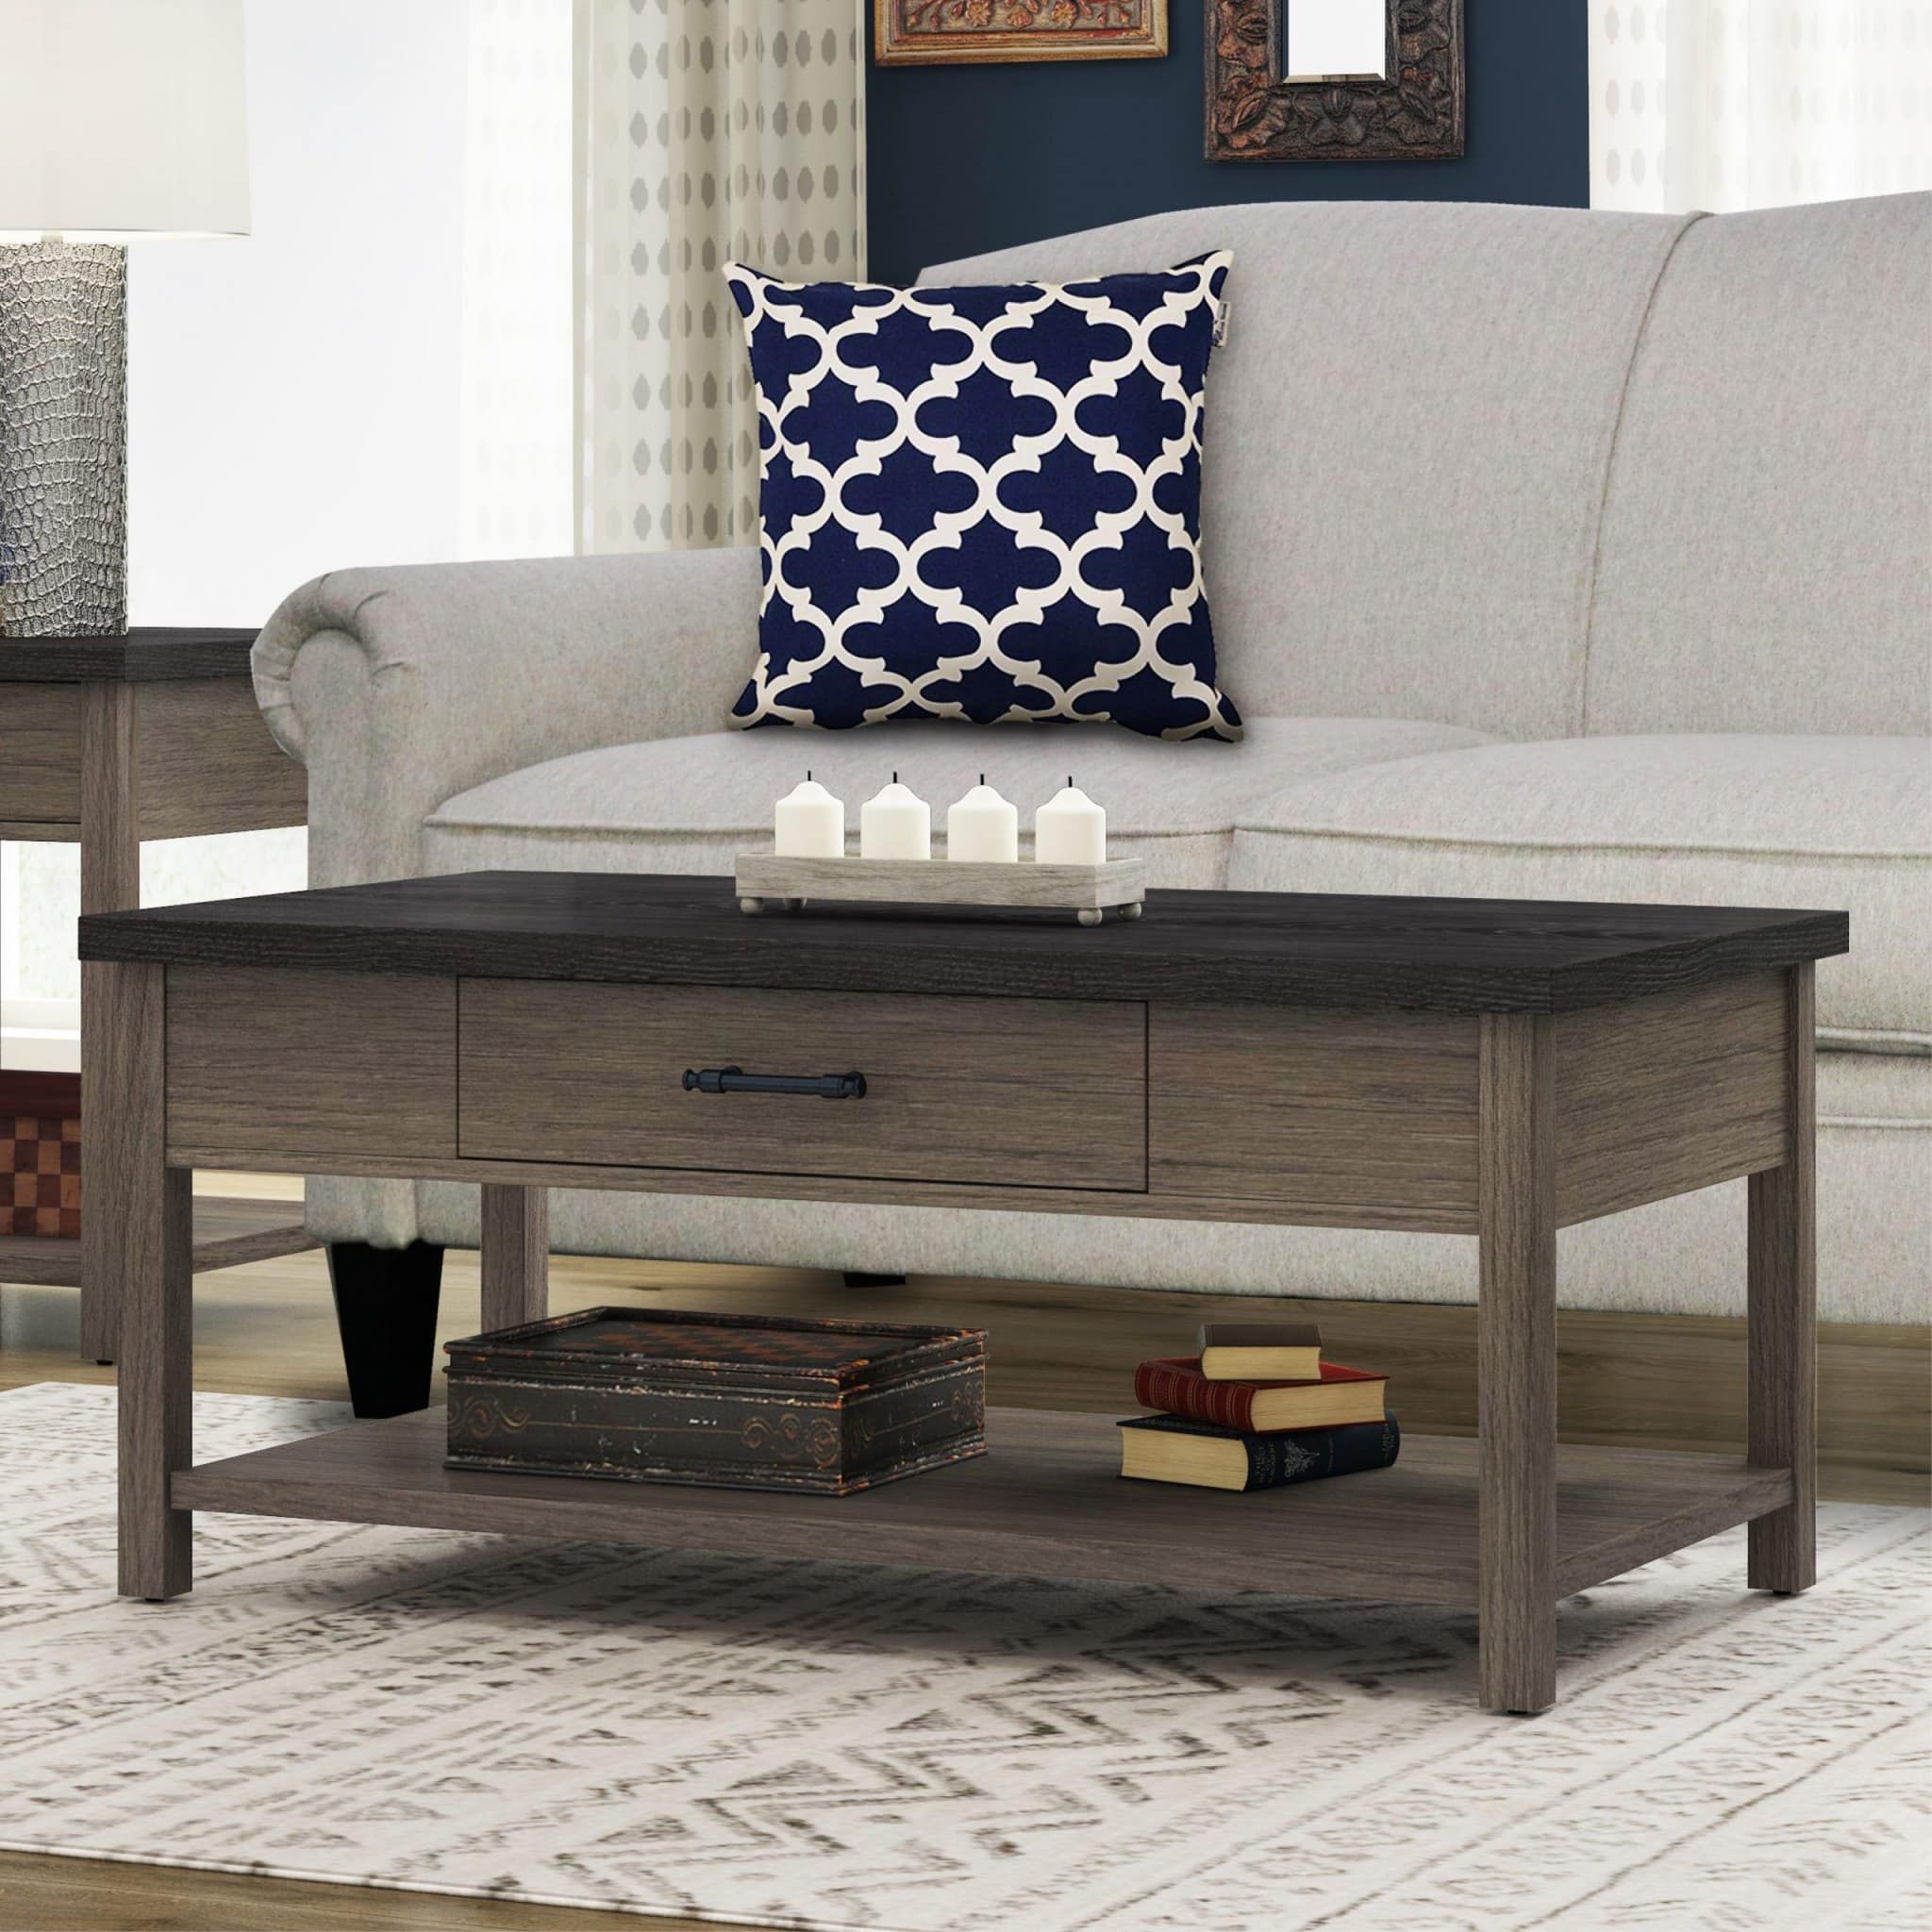 Two Tone Espresso And Medium Brown Coffee Table – Whalen Furniture With Regard To Medium Coffee Tables (View 14 of 20)